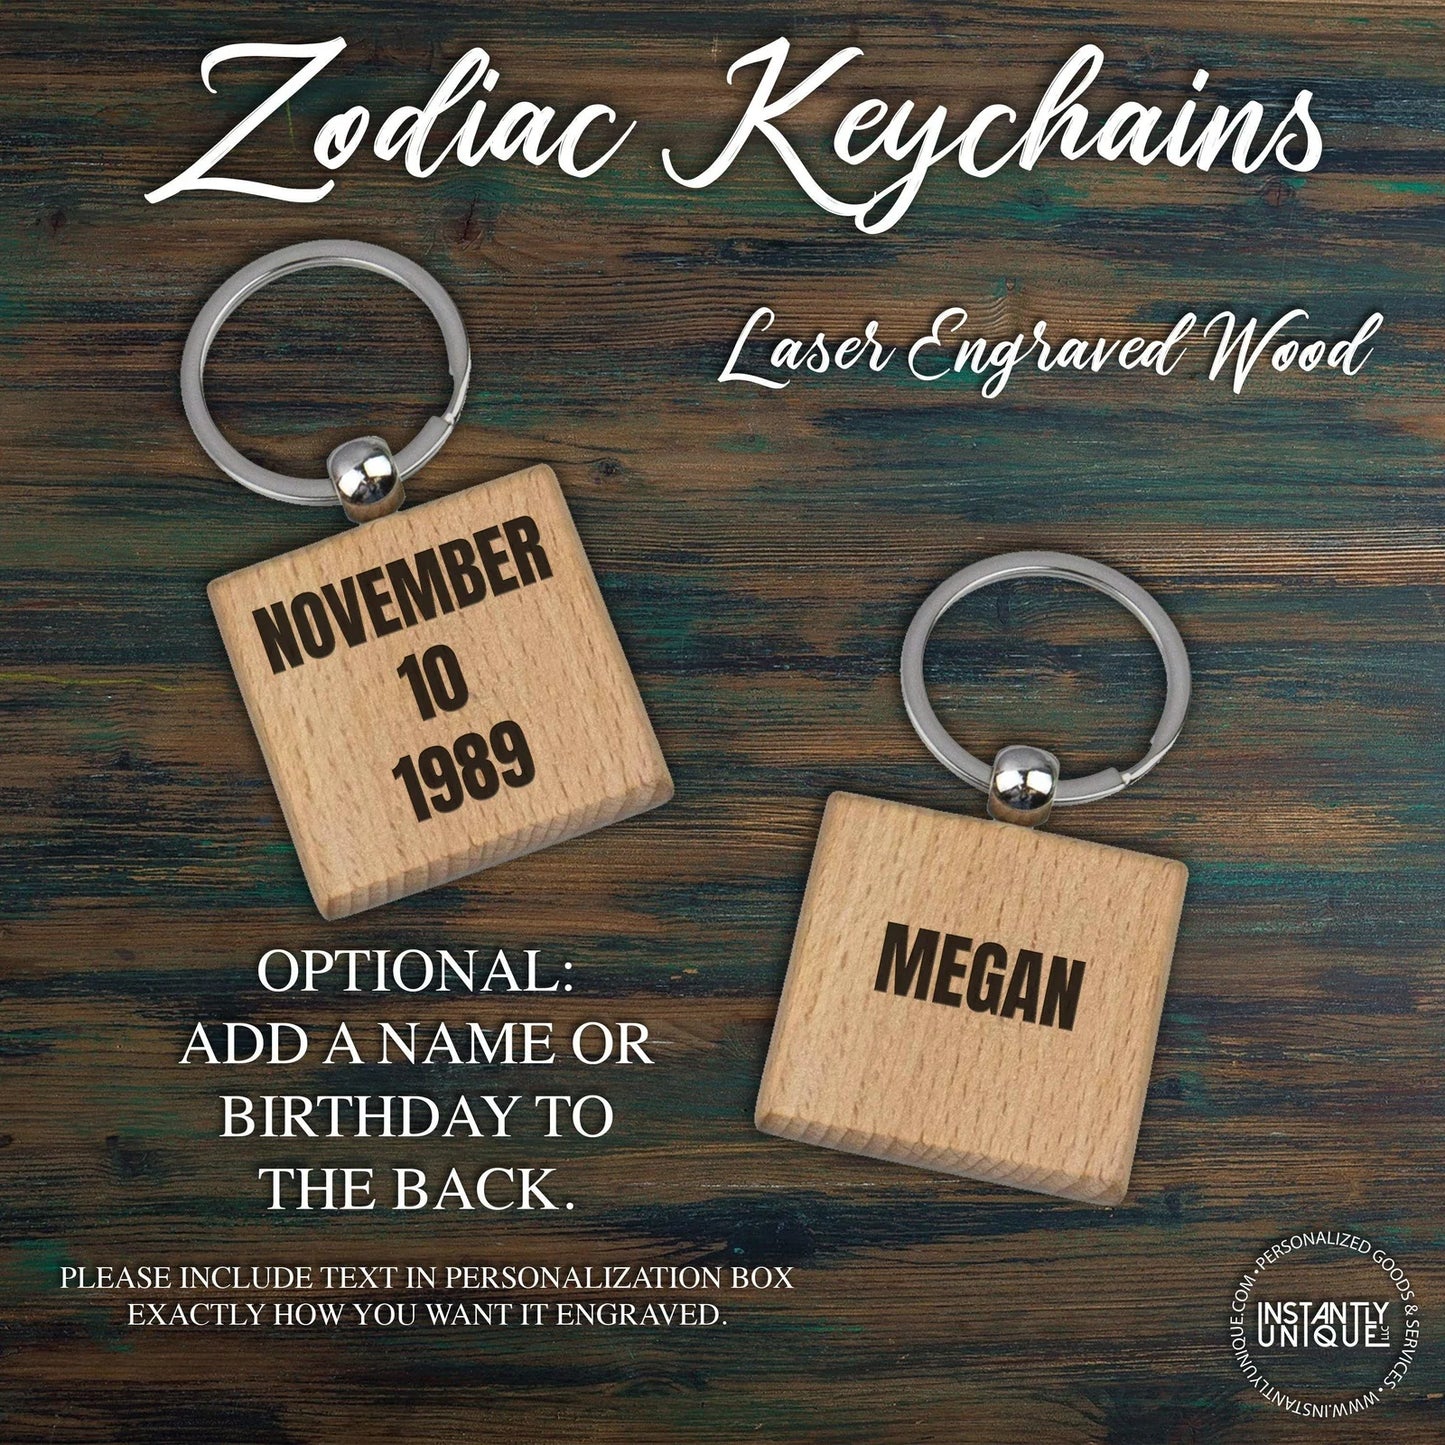 Zodiac Sign Engraved Wooden Keychain